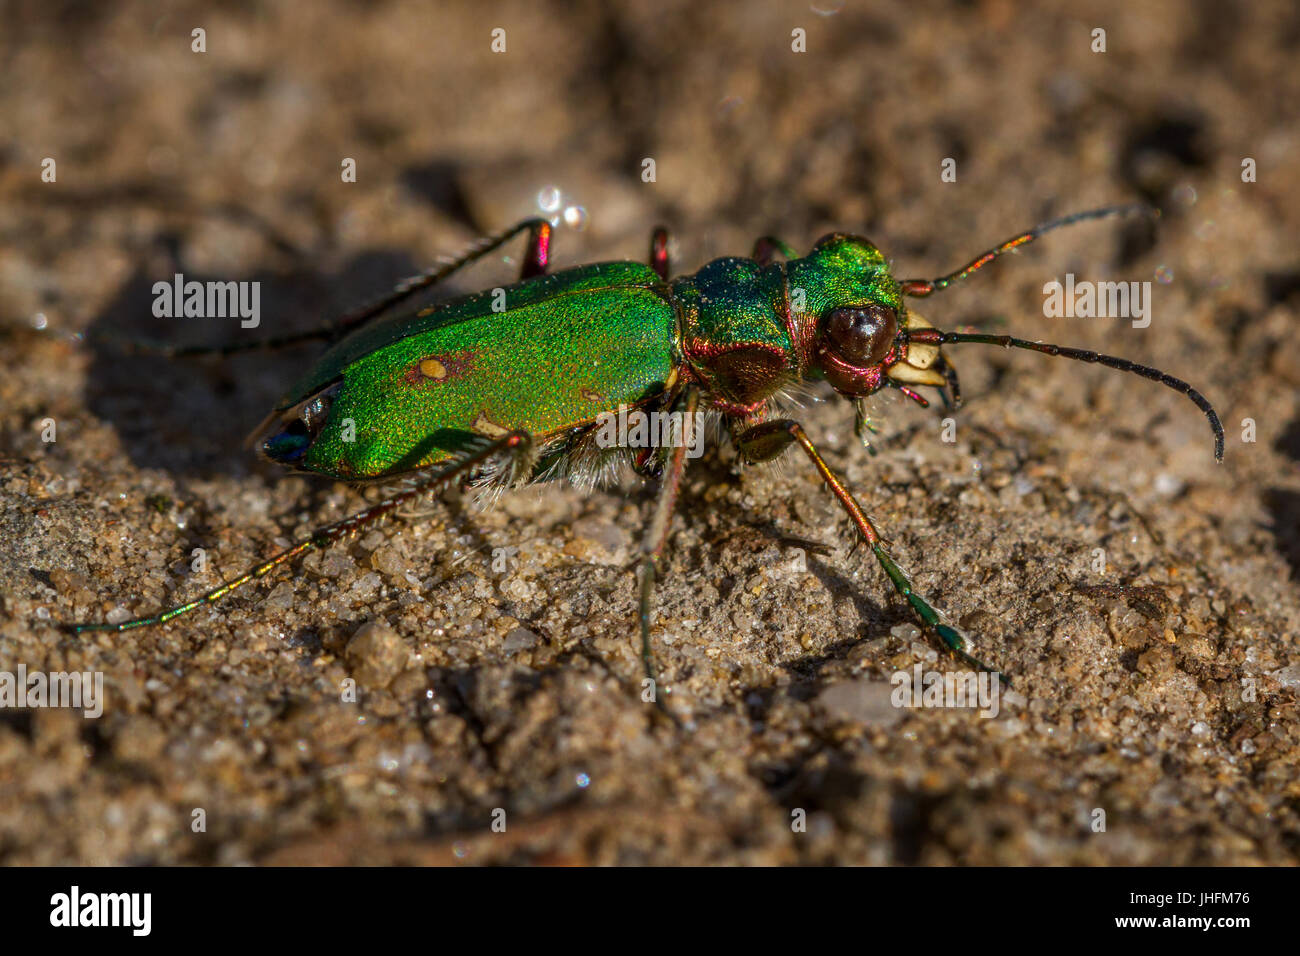 UK wildlife: The metallic 'green tiger beetle', cicindela campestris, one of the UK's fastest insects with huge pale jaws for hunting. Stock Photo